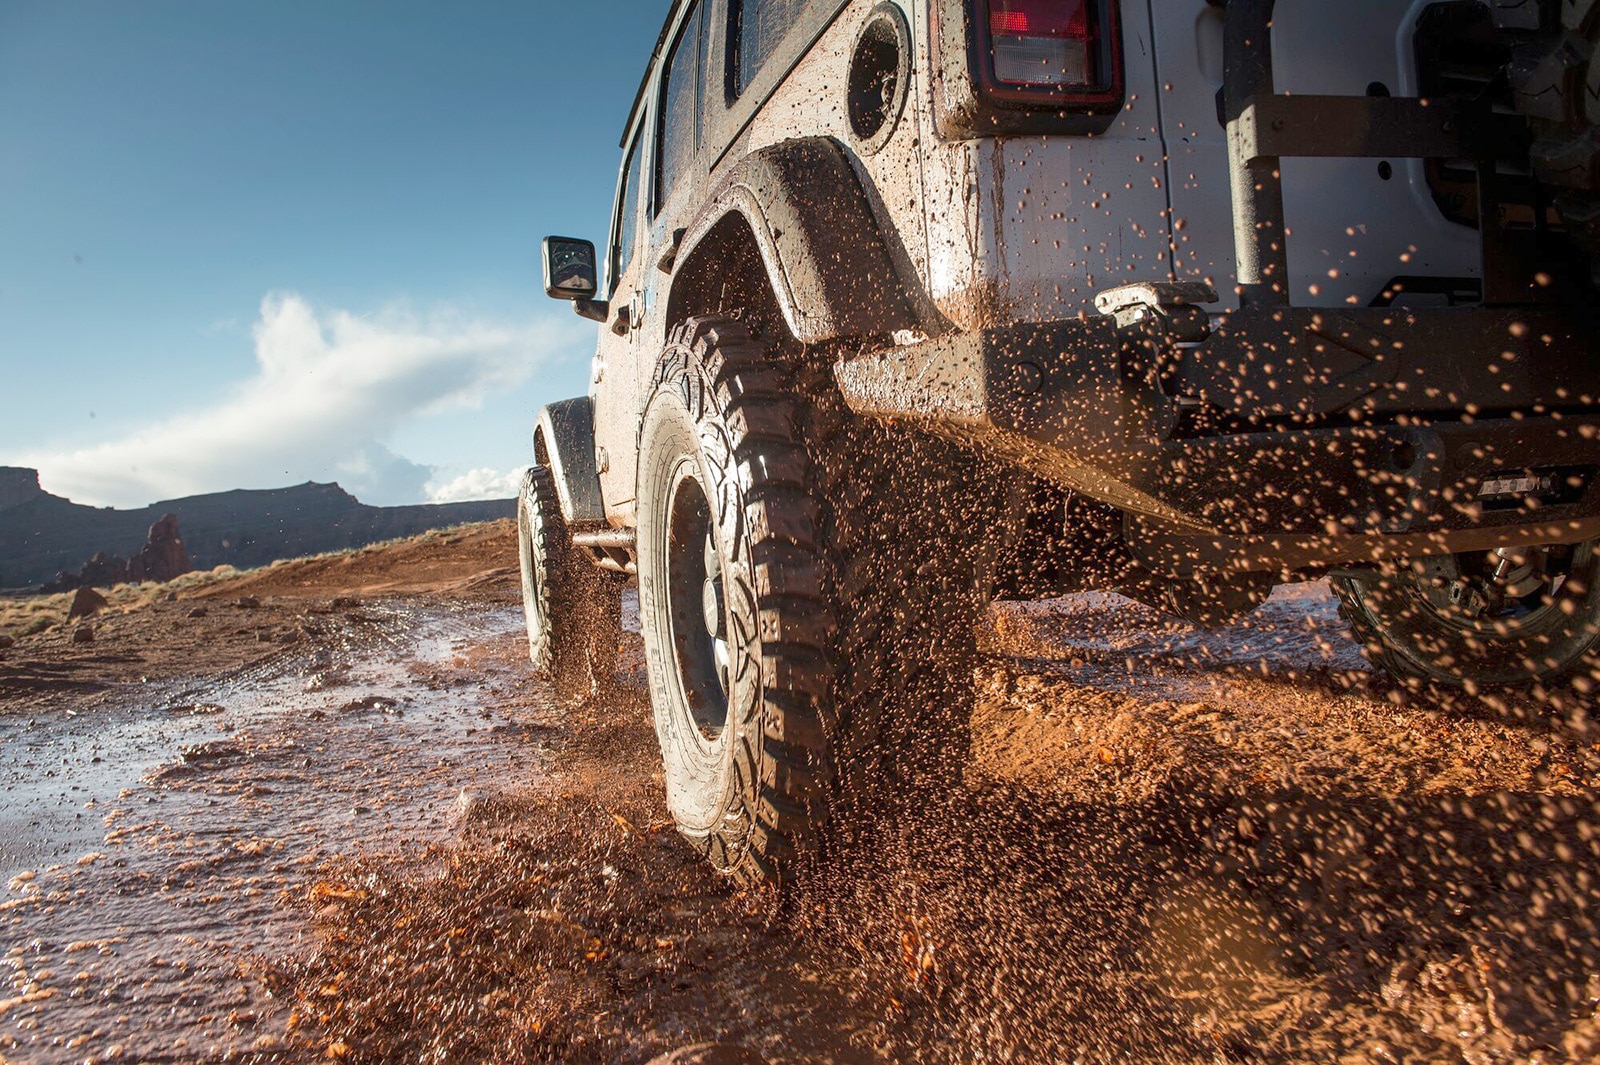 Essential Off-Roading Gear - Must-Haves - Recovery Tools, Clothing & More